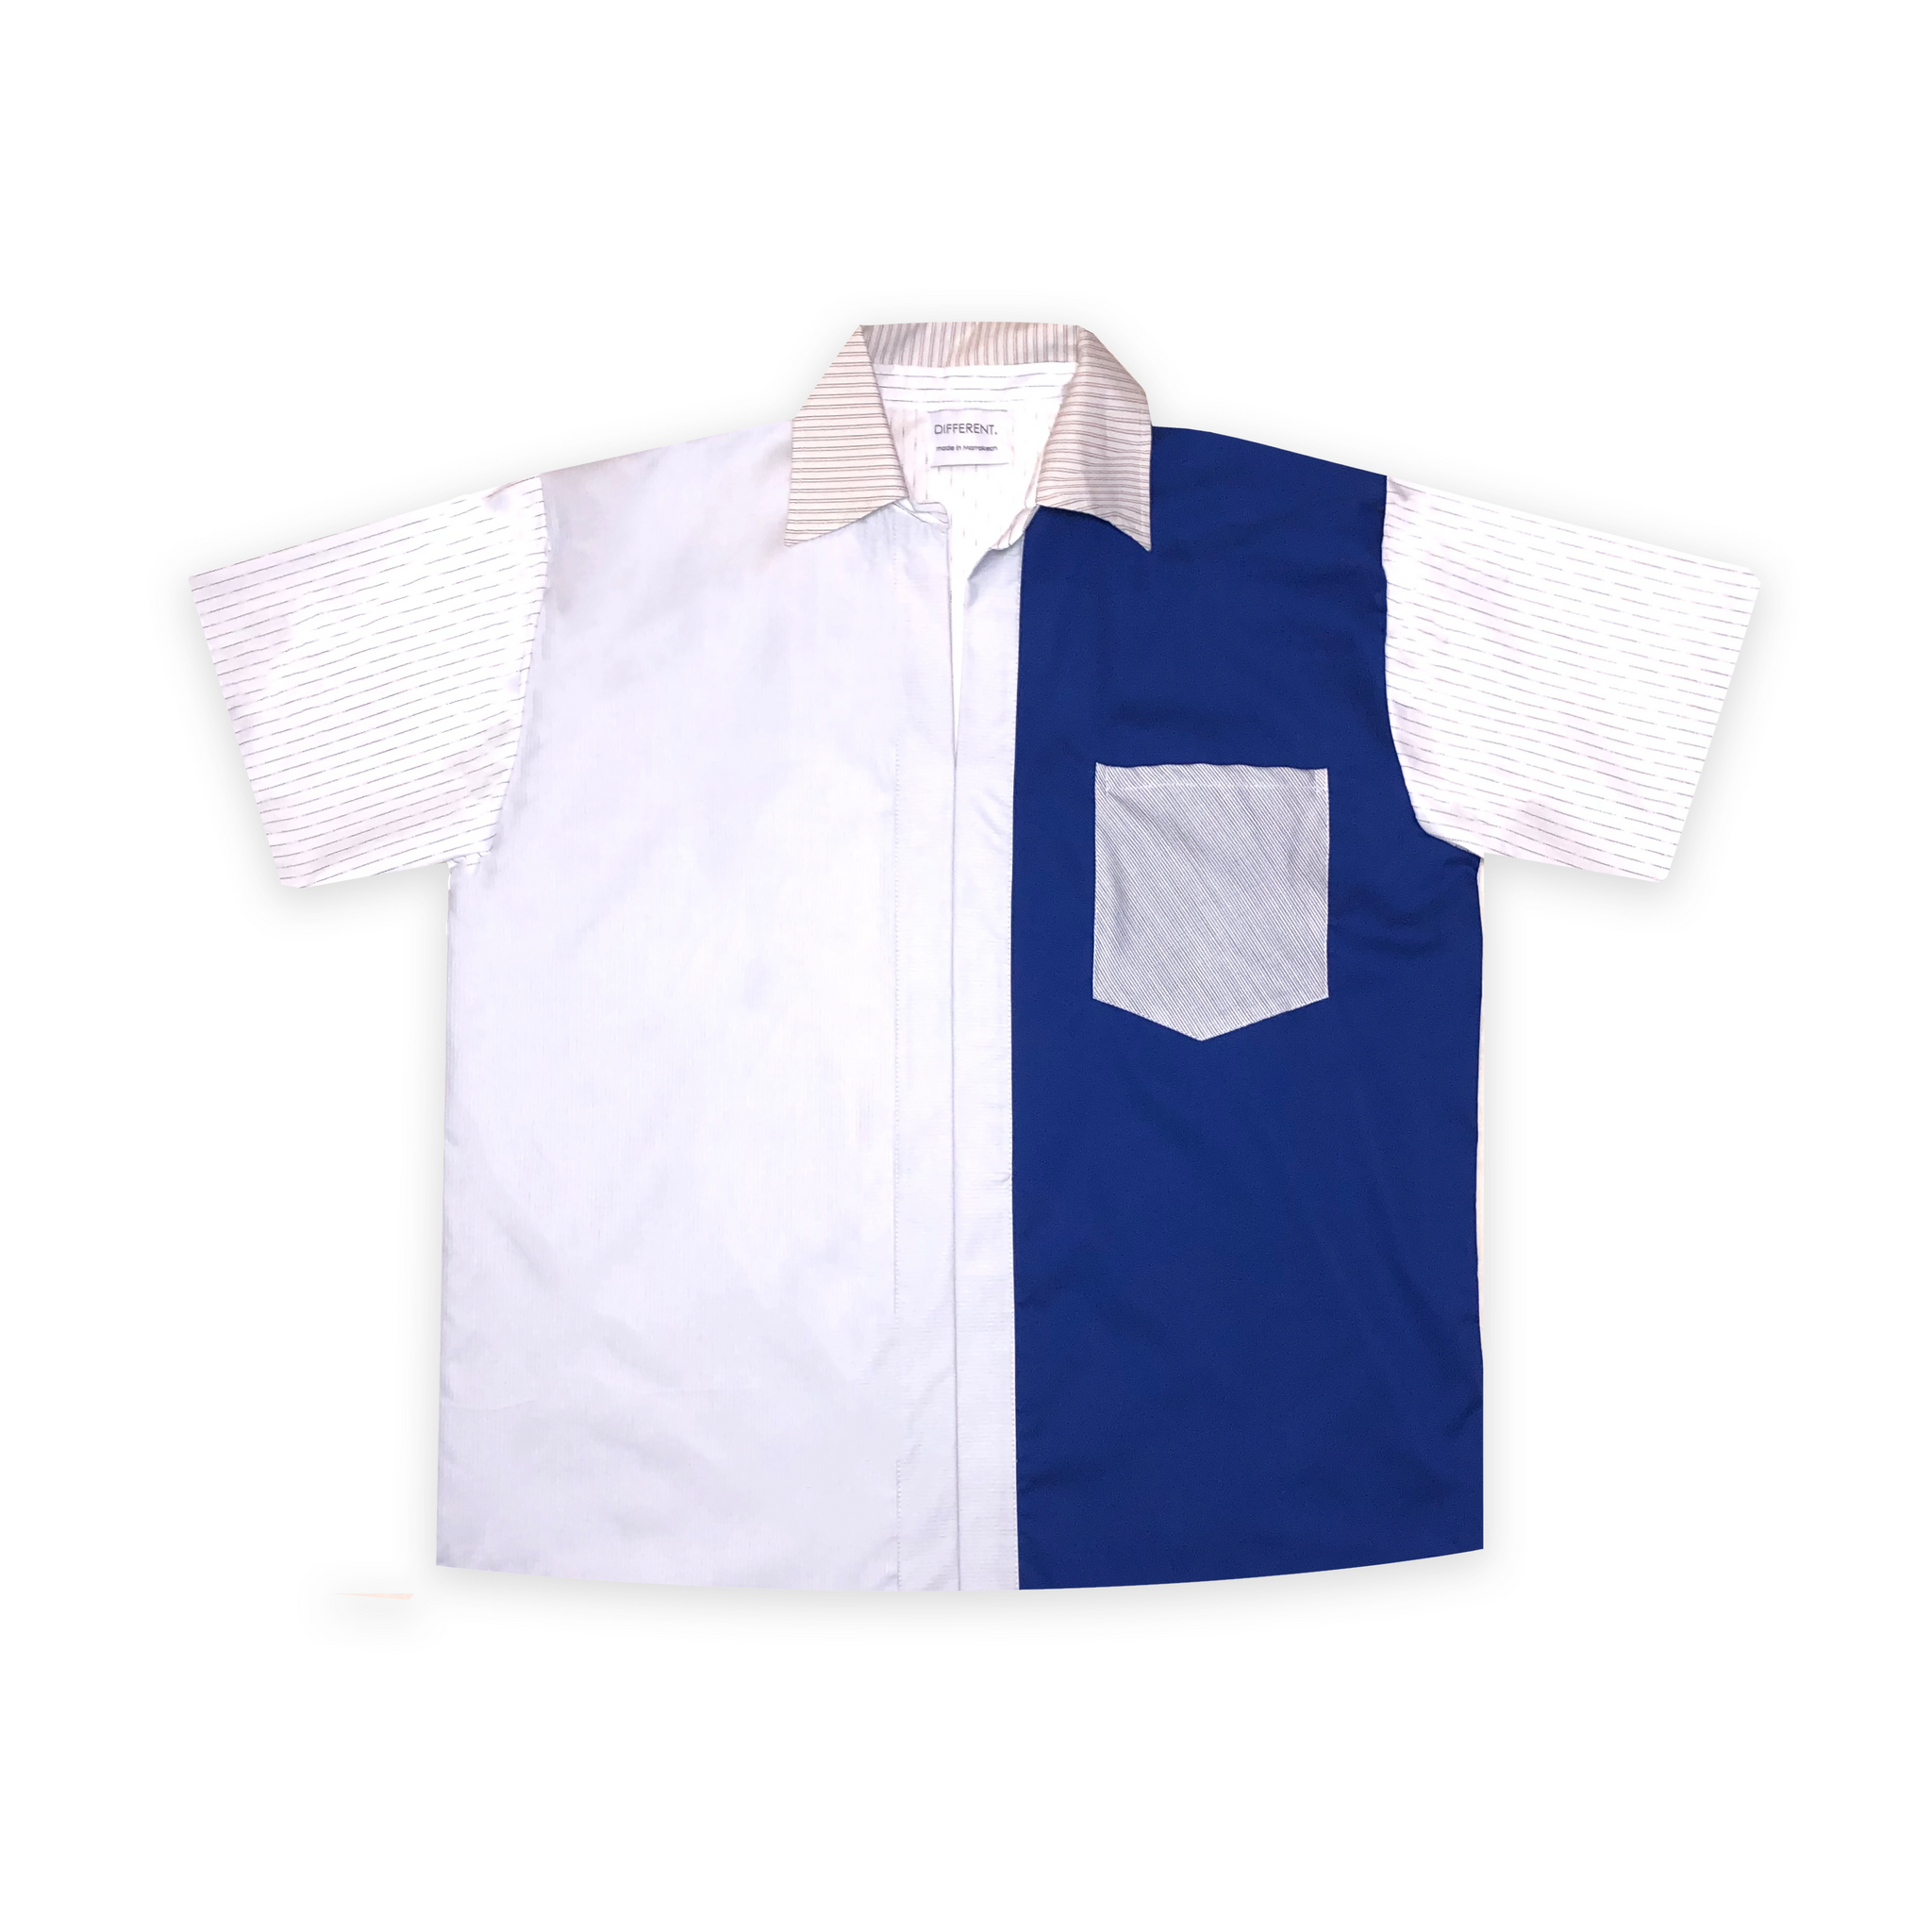 BLUE AND WHITE COLLAR T-SHIRT